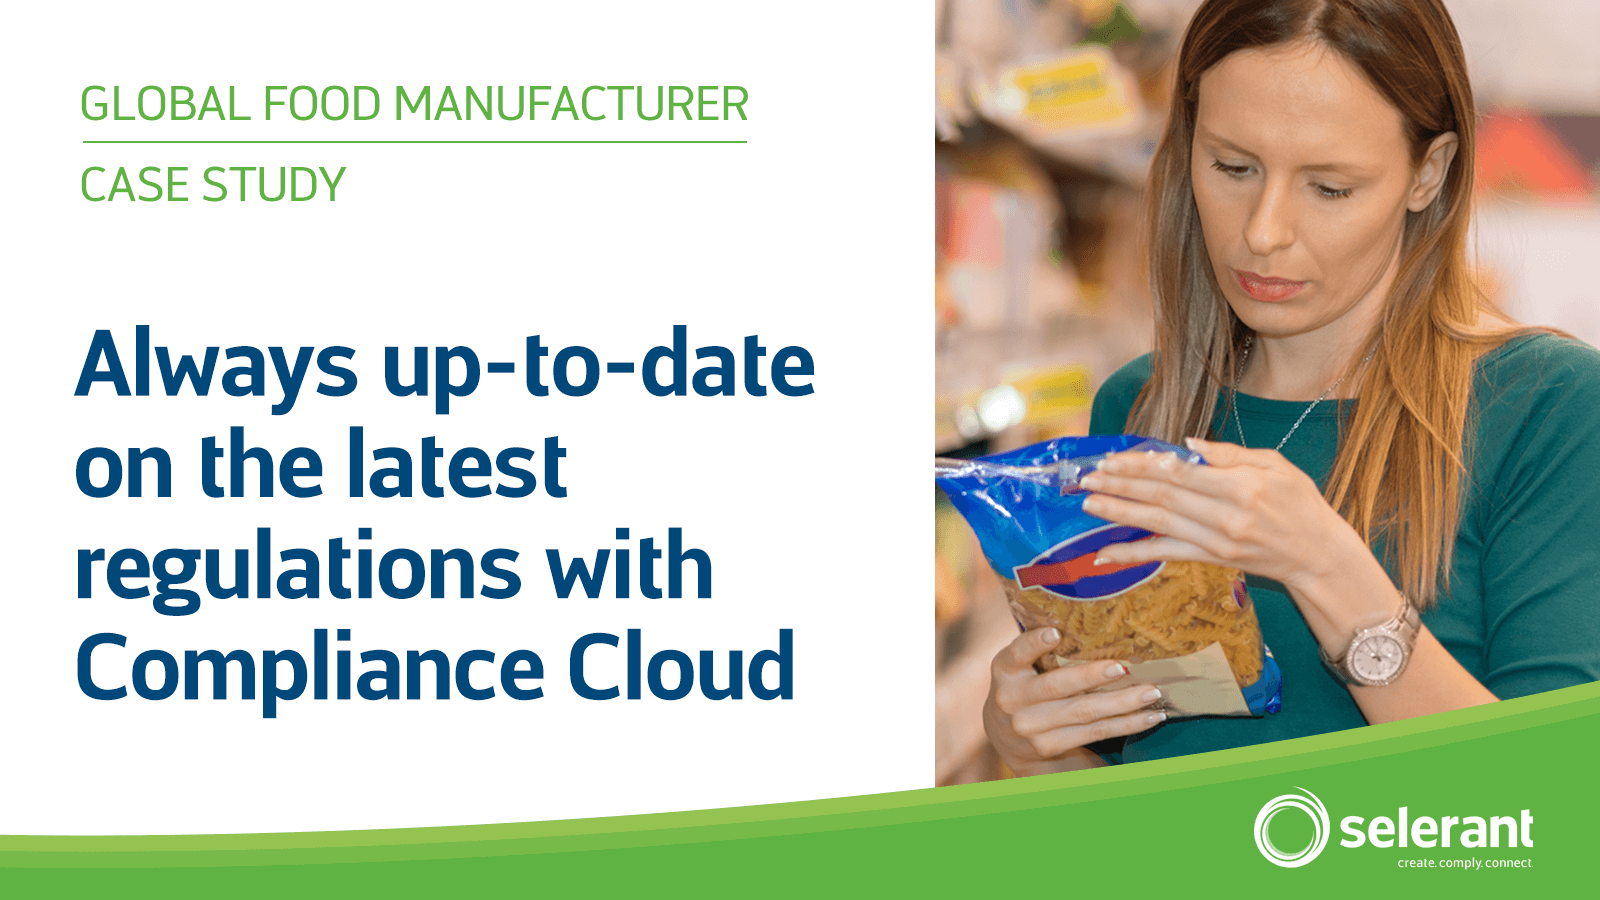 Selerant Compliance Cloud food and beverage